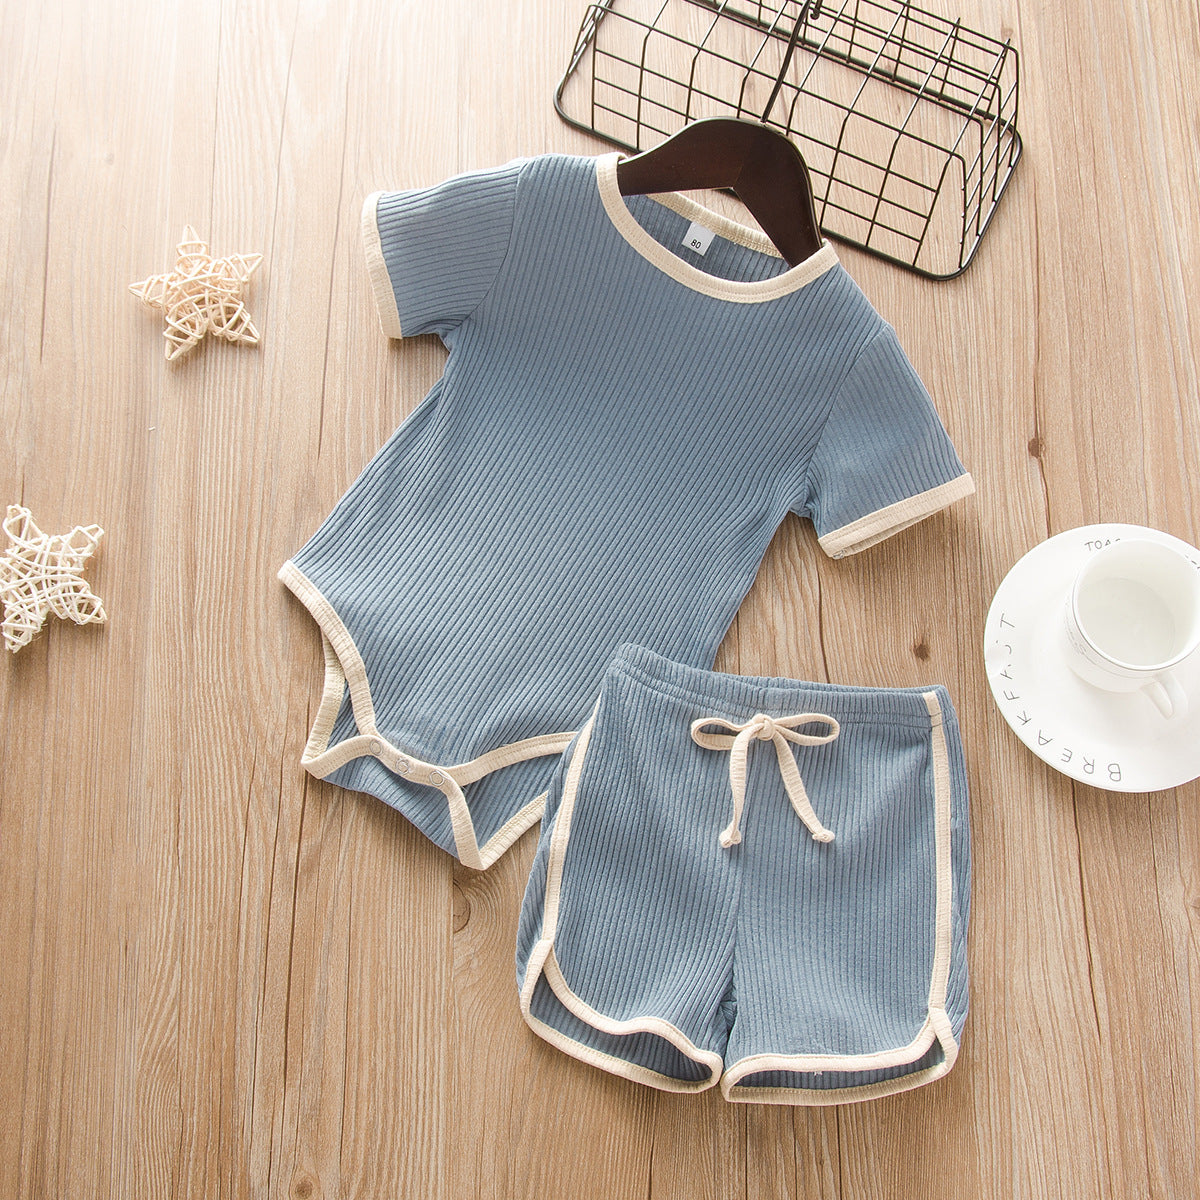 Newborn And Baby Unisex Summer Sets New Pit Romper And Same Color Shorts Soft And Comfortable Two-Piece Set  Wholesale Baby Clothes